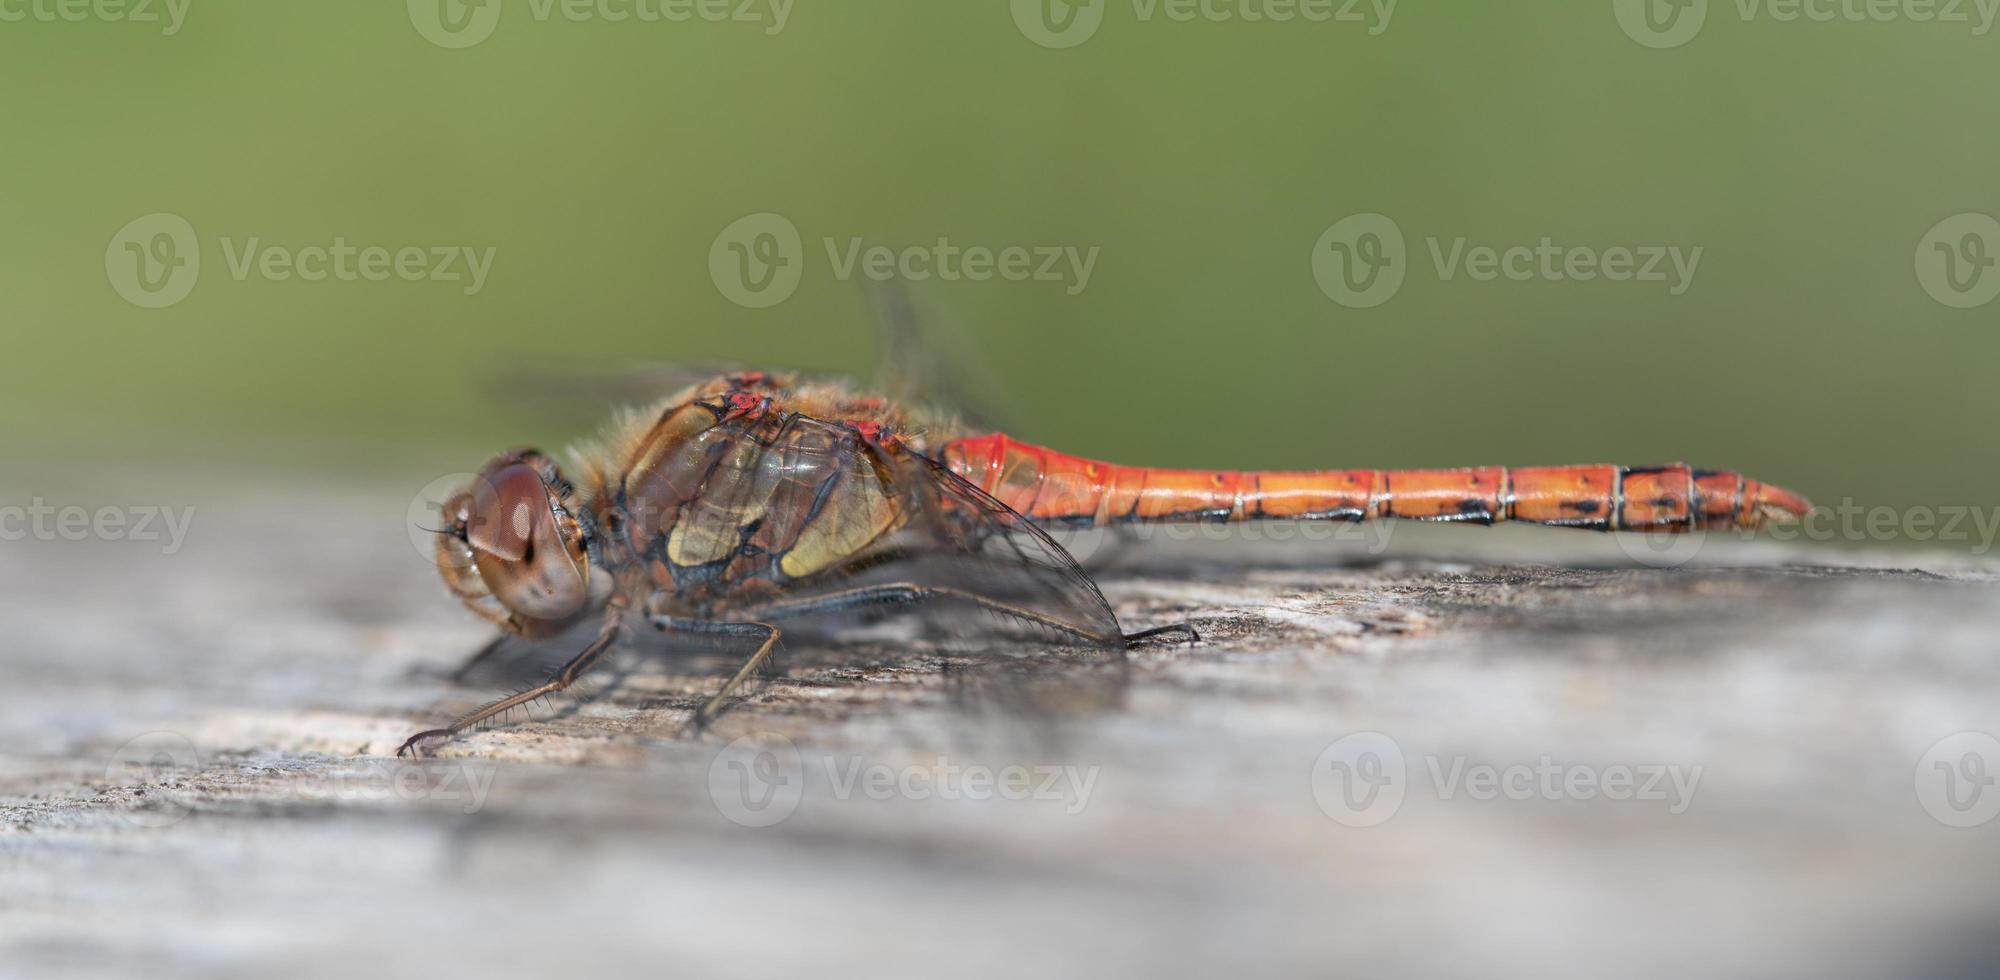 Close-up of a wild dragonfly with a red body and long wings sitting on a piece of old wood against a green background photo